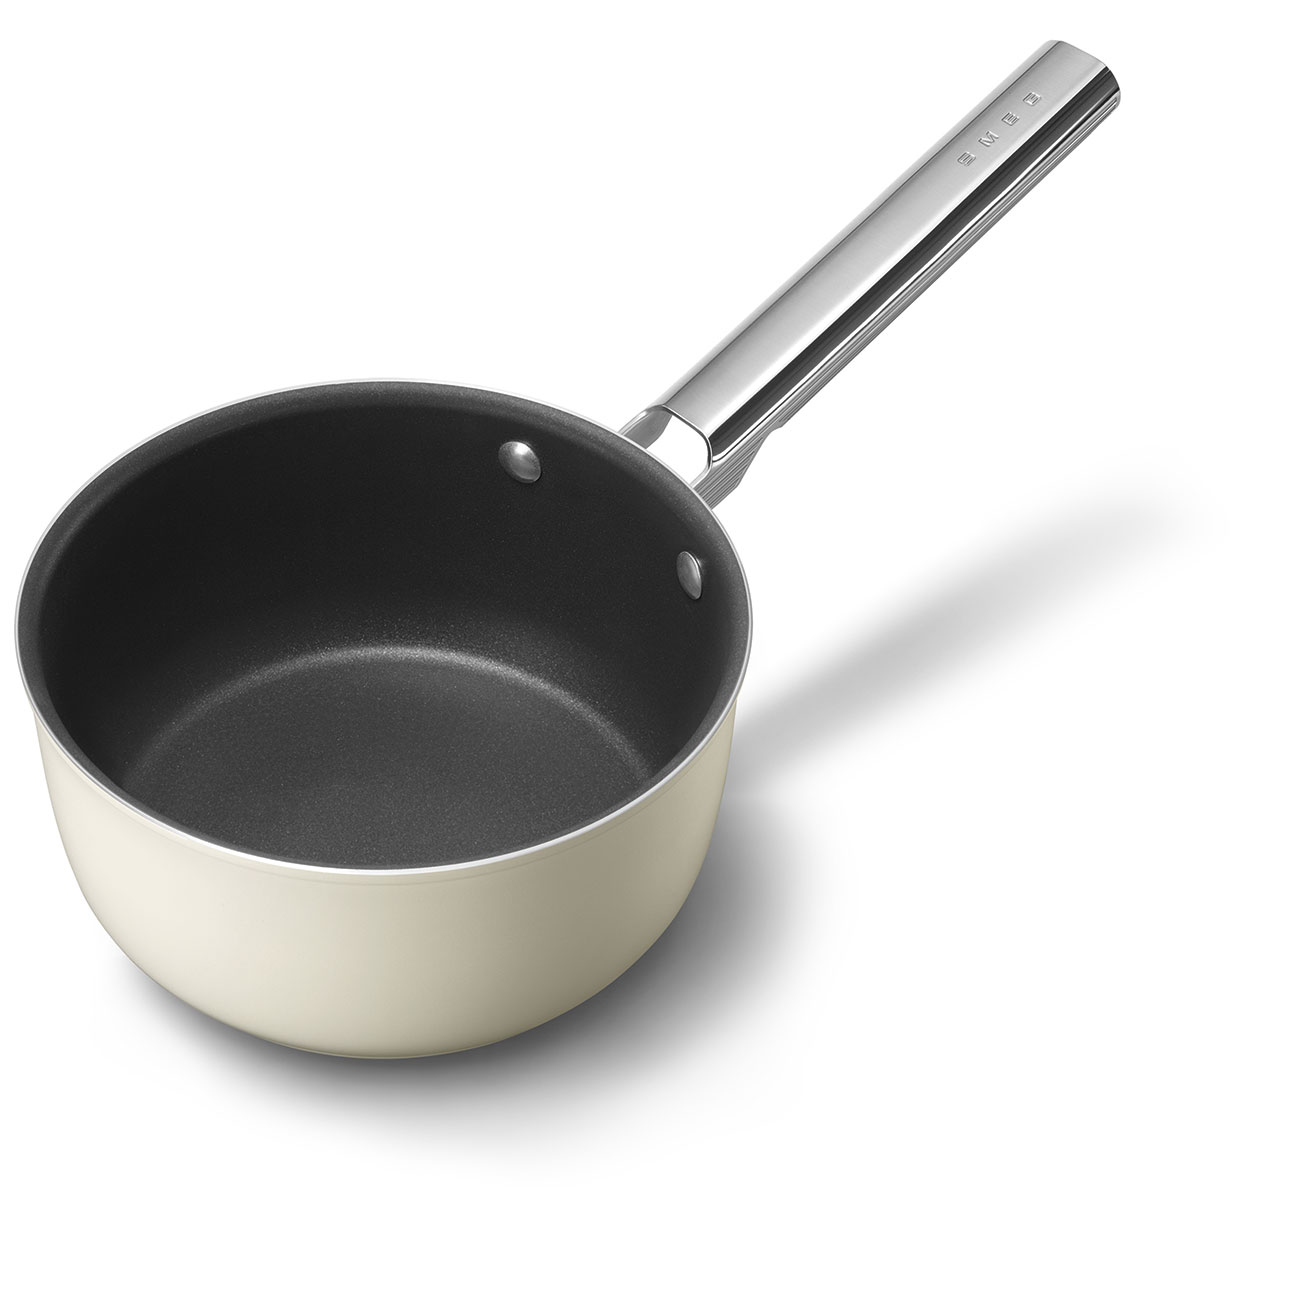 Smeg Cream Non-stick Saucepan with glass lid and stainless steel handle_3